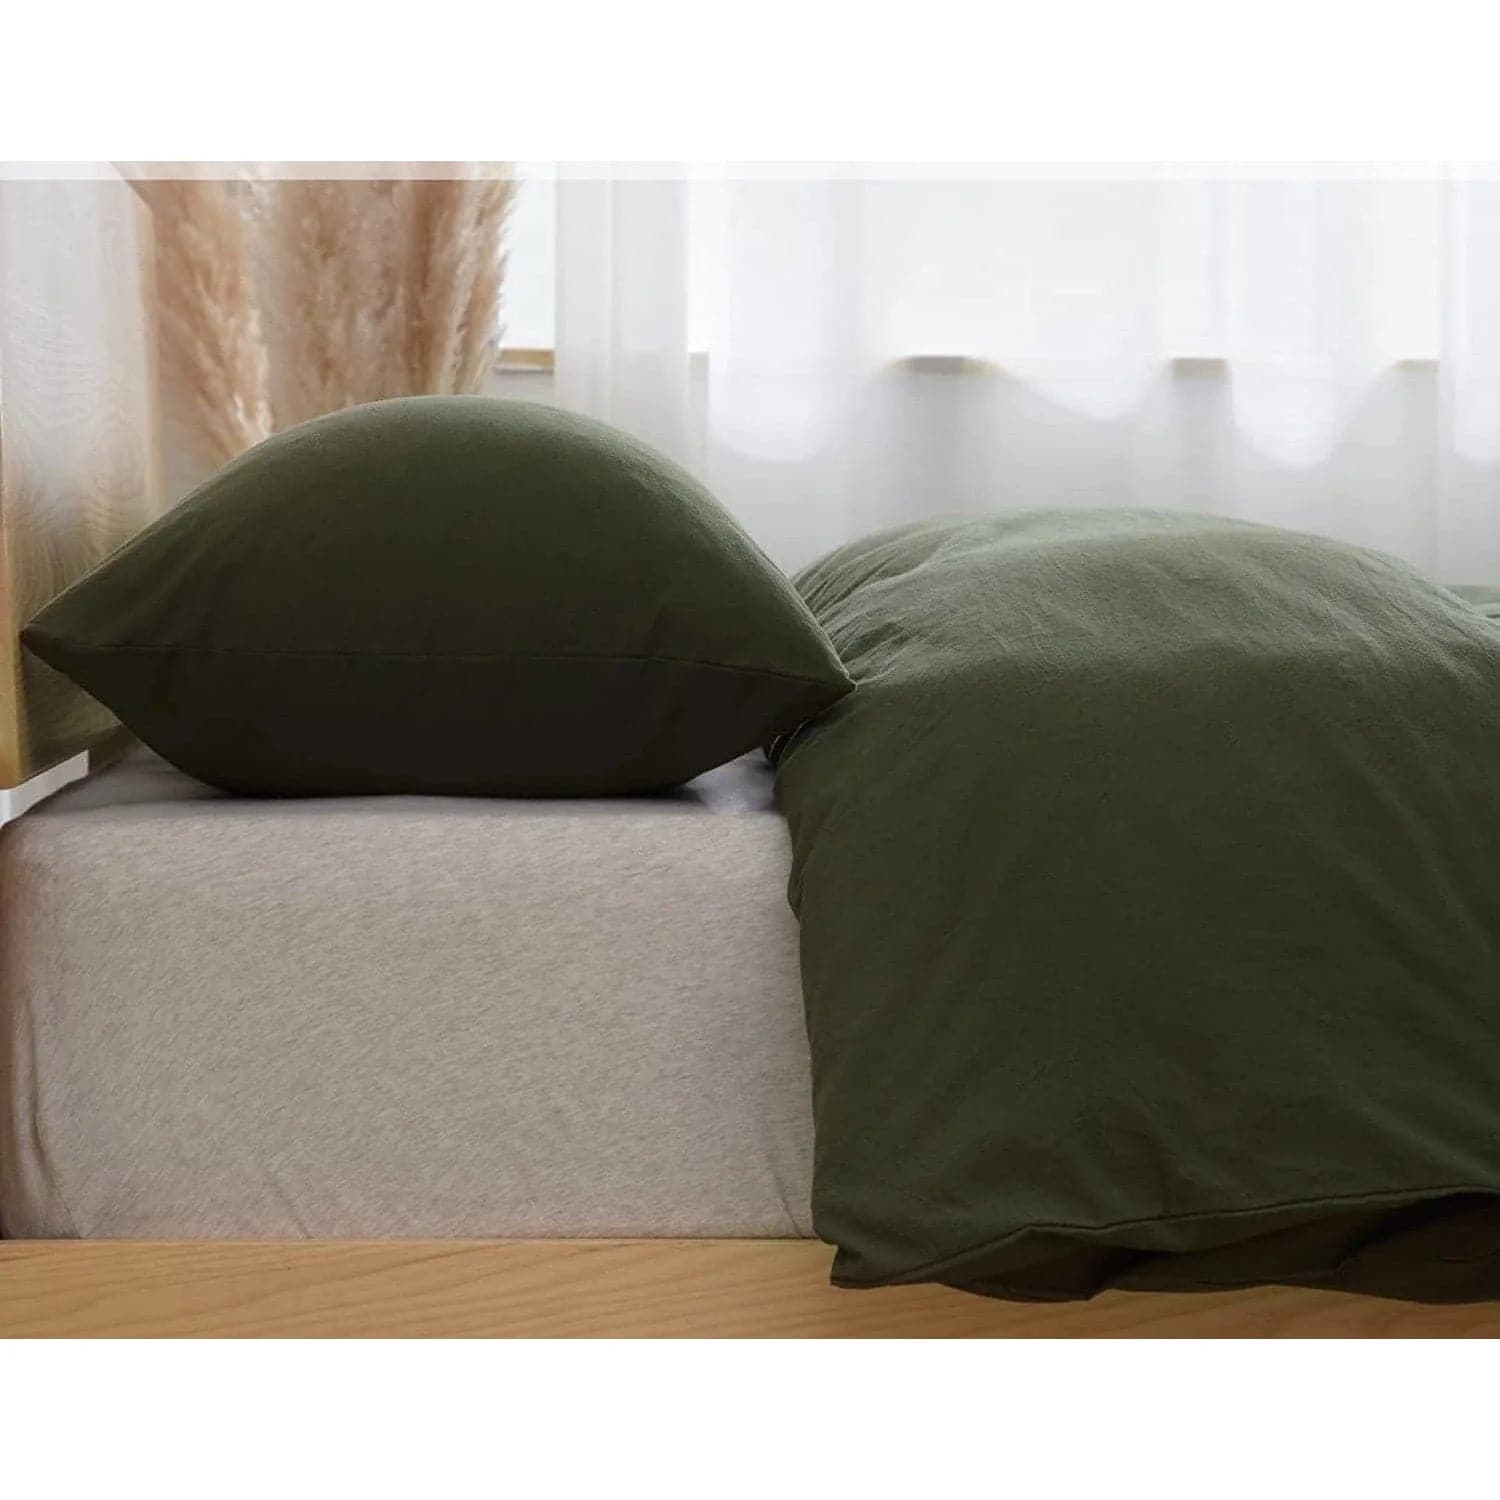 Moss Green 100% Cotton 3 Piece Duvet Cover Set 4 Piece Sheet Set Pre-washed  200 TC Percale -  Canada